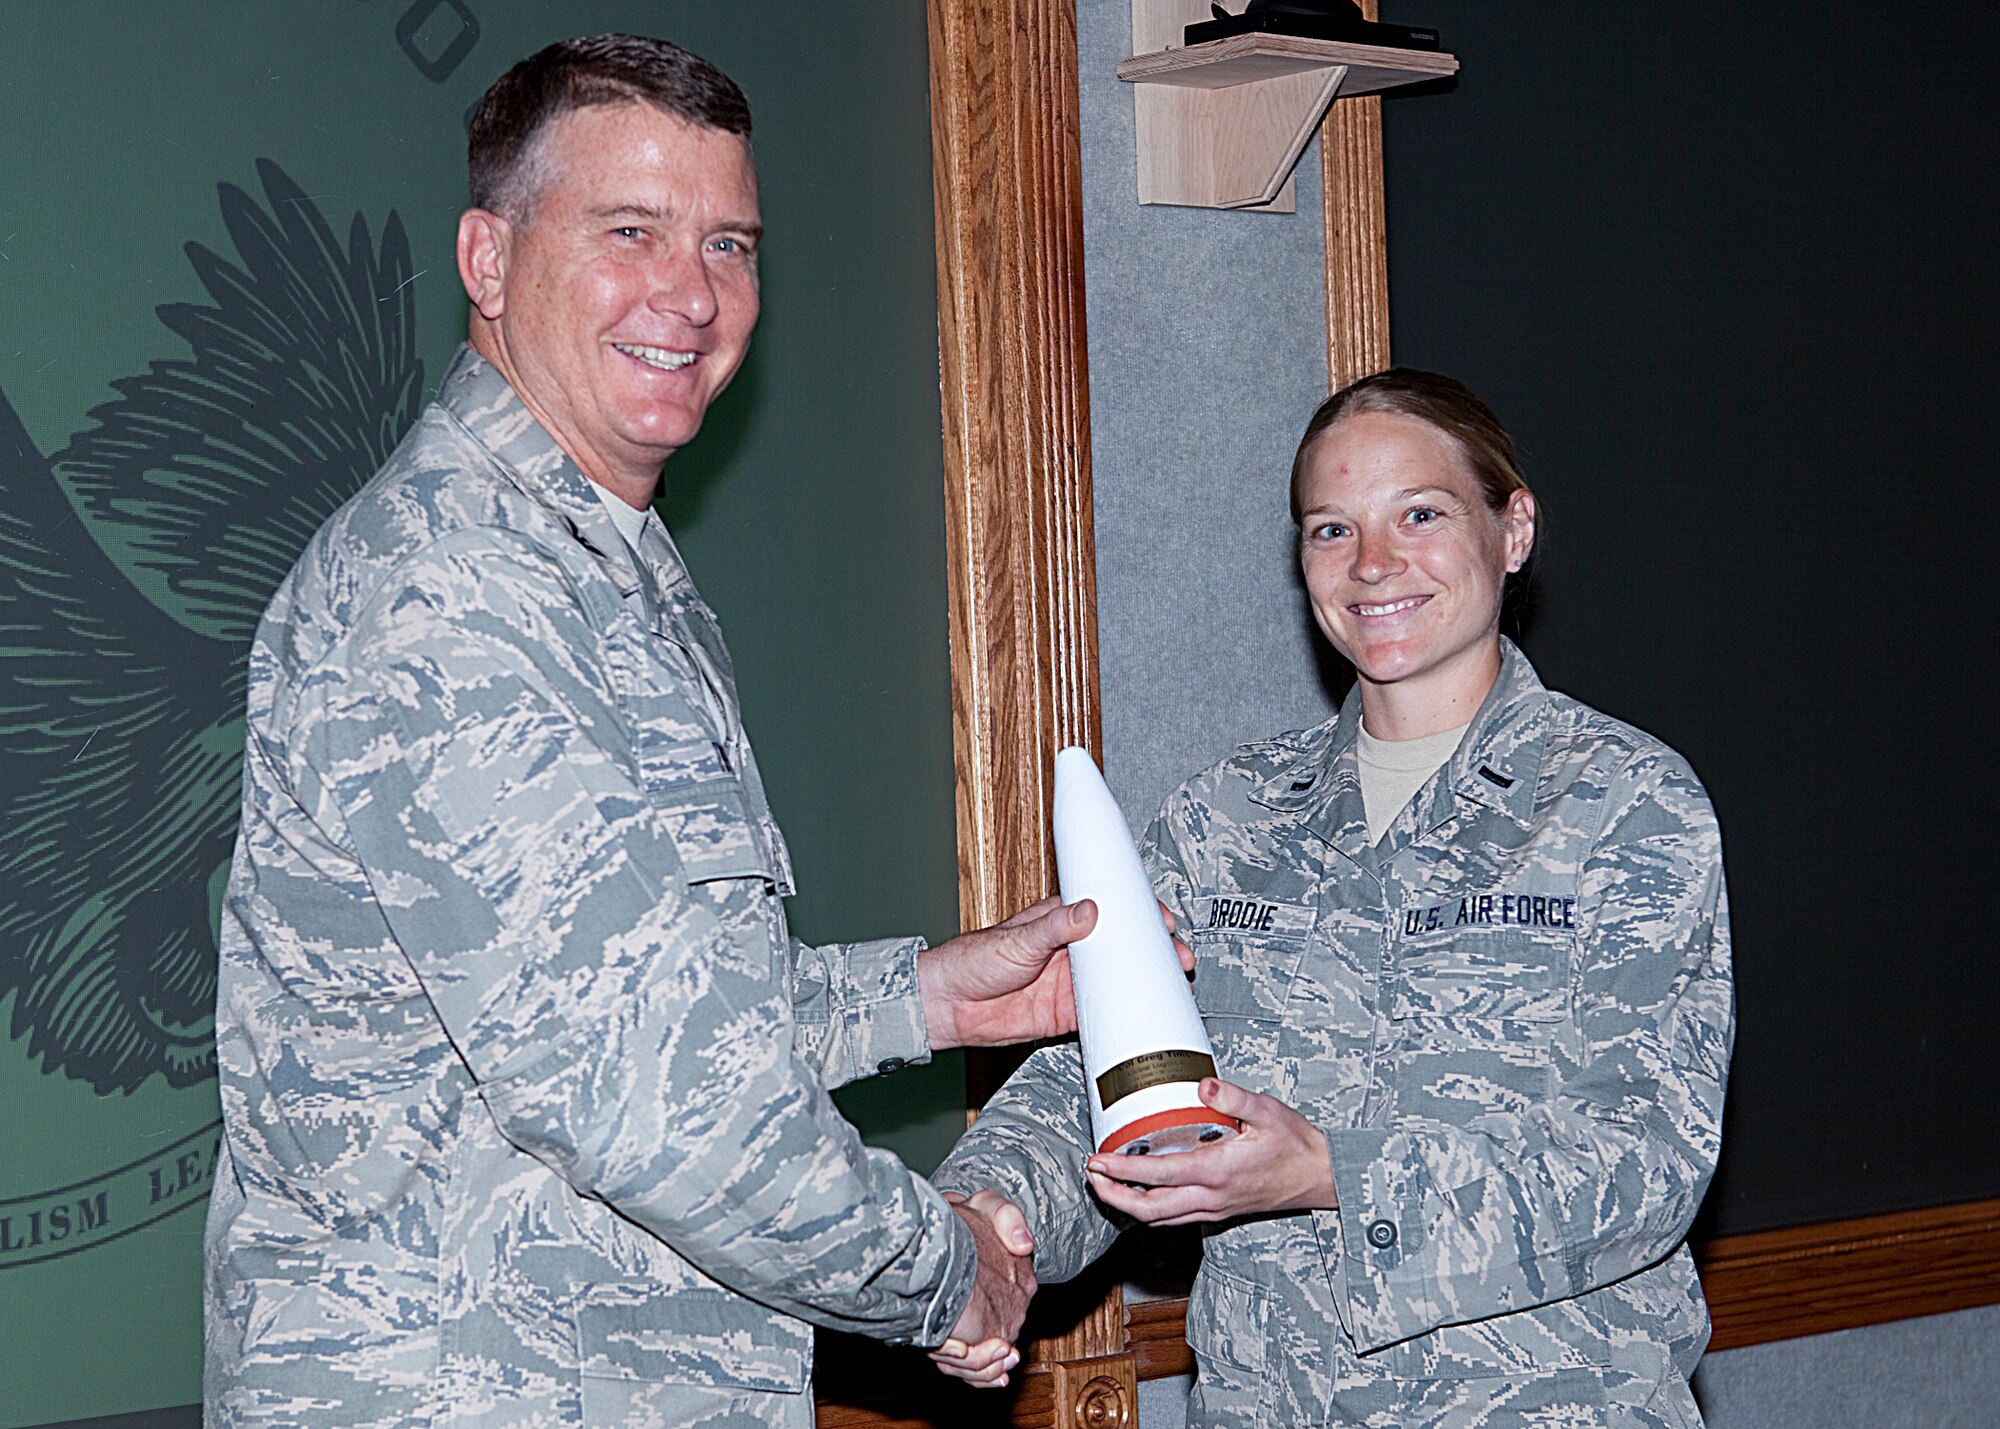 Col. Greg Tims, 90th Missile Wing commander, accepts the Nuclear Logisticians Award from 1st Lt. Christin Brodie, 90th Logistics Readiness Squadron, and the National Logistics Officers Association Wednesday. Lt. Col. Jondavid Duvall, 90th LRS, presented the award to Colonel Tims, bestowing upon him the honorary title of “Loggie.” (U.S. Air Force photo by Matt Bilden)